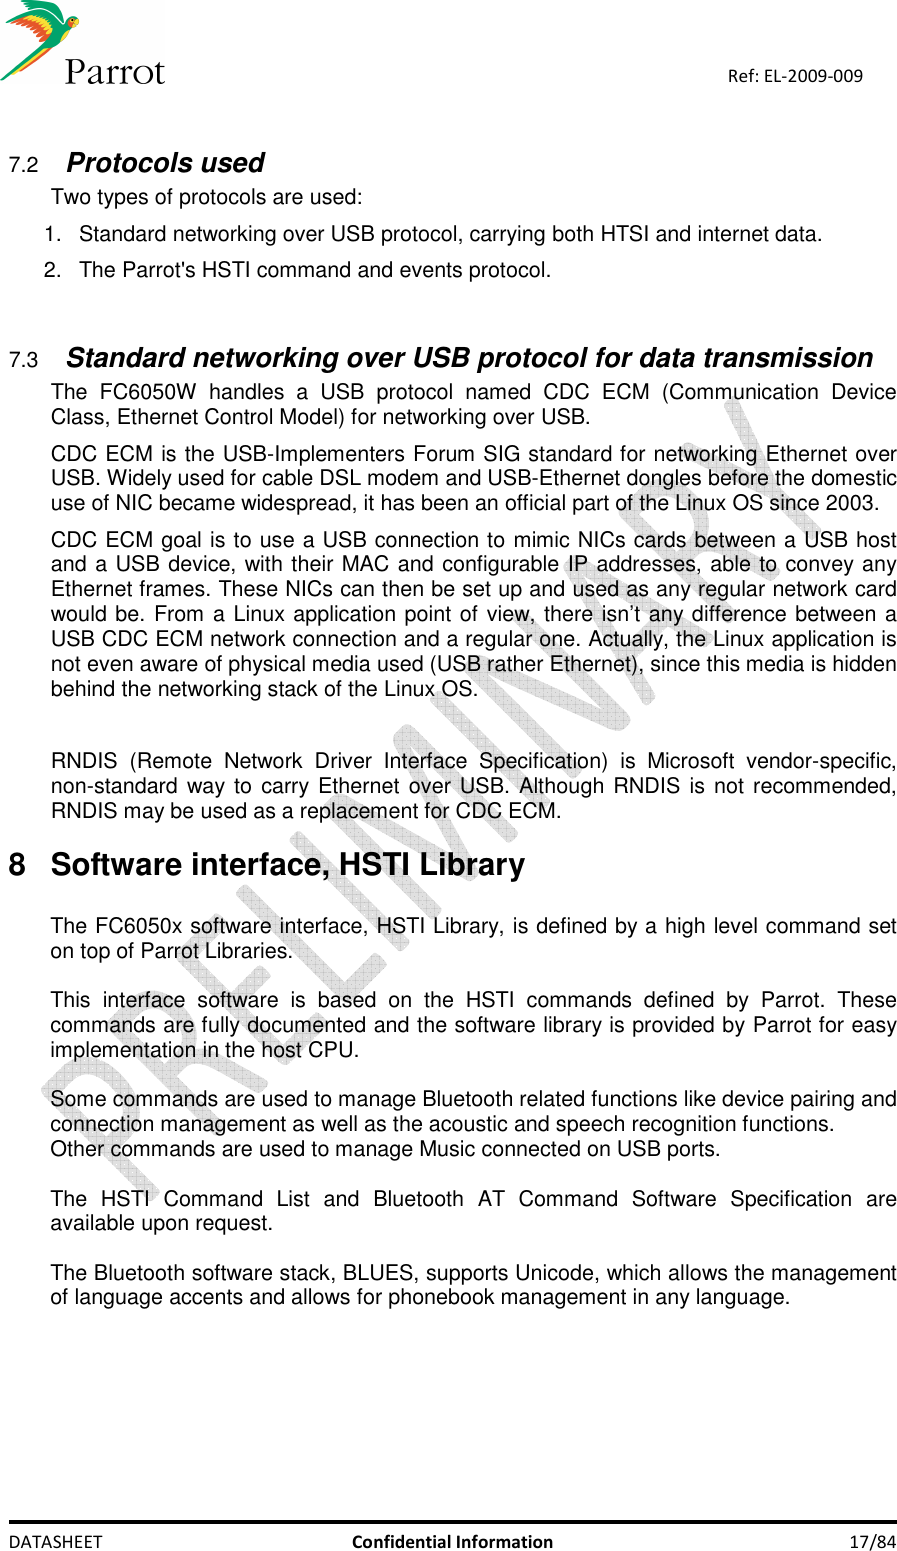    DATASHEET  Confidential Information  17/84 Ref: EL-2009-009  7.2 Protocols used Two types of protocols are used: 1.  Standard networking over USB protocol, carrying both HTSI and internet data. 2.  The Parrot&apos;s HSTI command and events protocol.   7.3 Standard networking over USB protocol for data transmission The  FC6050W  handles  a  USB  protocol  named  CDC  ECM  (Communication  Device Class, Ethernet Control Model) for networking over USB. CDC ECM is the USB-Implementers Forum SIG standard for networking Ethernet over USB. Widely used for cable DSL modem and USB-Ethernet dongles before the domestic use of NIC became widespread, it has been an official part of the Linux OS since 2003. CDC ECM goal is to use a USB connection to mimic NICs cards between a USB host and a USB device, with their MAC and configurable IP addresses, able to convey any Ethernet frames. These NICs can then be set up and used as any regular network card would be. From a Linux application point of view, there isn’t any difference between a USB CDC ECM network connection and a regular one. Actually, the Linux application is not even aware of physical media used (USB rather Ethernet), since this media is hidden behind the networking stack of the Linux OS.  RNDIS  (Remote  Network  Driver  Interface  Specification)  is  Microsoft  vendor-specific, non-standard way to  carry Ethernet over USB. Although RNDIS is not recommended, RNDIS may be used as a replacement for CDC ECM.  8  Software interface, HSTI Library  The FC6050x software interface, HSTI Library, is defined by a high level command set on top of Parrot Libraries.  This  interface  software  is  based  on  the  HSTI  commands  defined  by  Parrot.  These commands are fully documented and the software library is provided by Parrot for easy implementation in the host CPU.  Some commands are used to manage Bluetooth related functions like device pairing and connection management as well as the acoustic and speech recognition functions. Other commands are used to manage Music connected on USB ports.  The  HSTI  Command  List  and  Bluetooth  AT  Command  Software  Specification  are available upon request.  The Bluetooth software stack, BLUES, supports Unicode, which allows the management of language accents and allows for phonebook management in any language.        